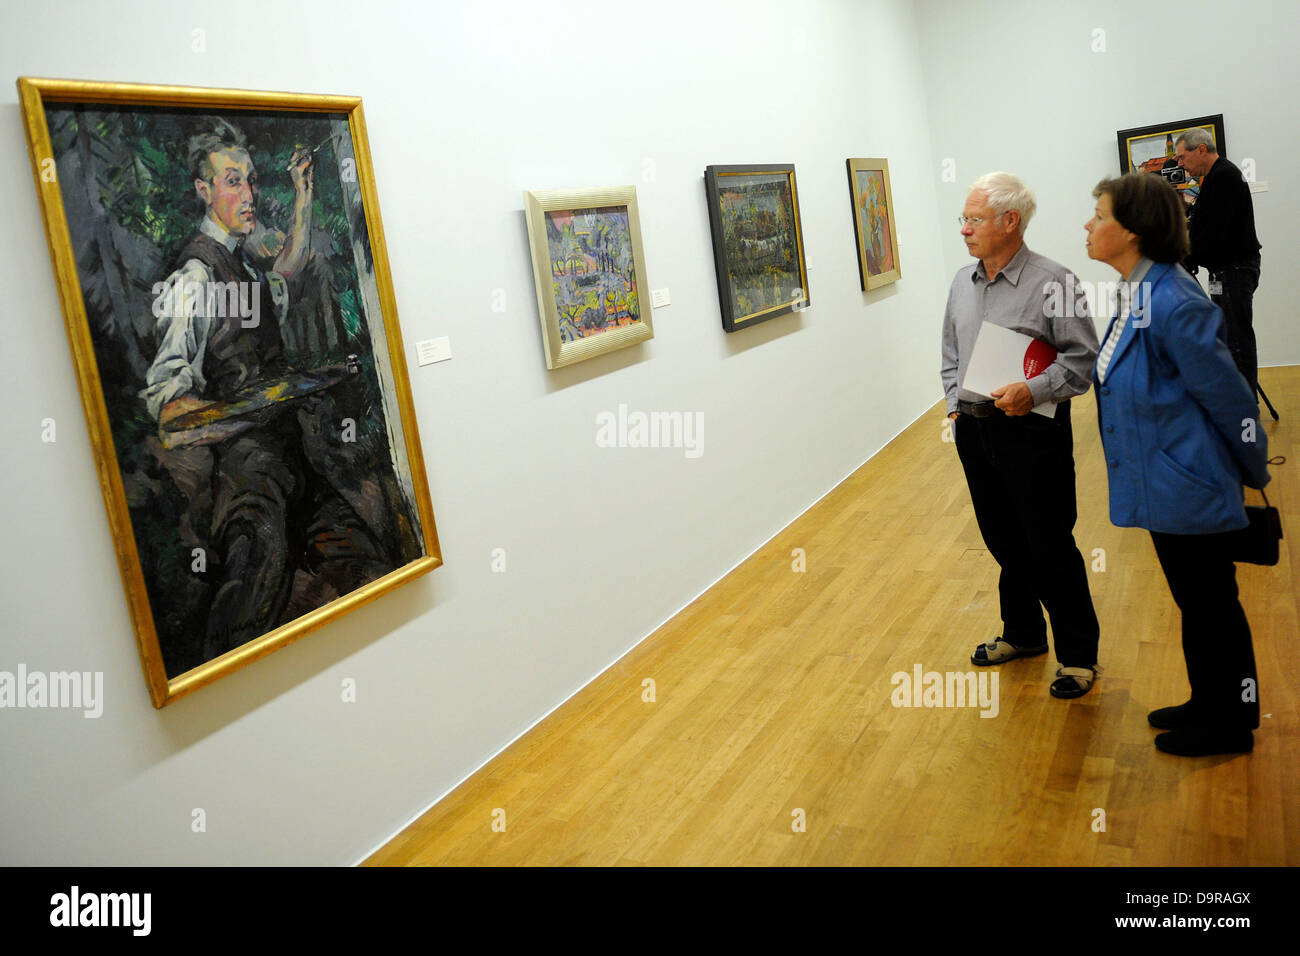 A visitors stand in front of the painting 'Self-Portrait' by Franz M. Jansen at Art Museum Bonn in Bonn, Germany, 25 June 2013. The art museum will show an exhibition titled 'An expressionist summer - Bonn 1913' on the occasion of the 100th anniversary of an exhibition of Rhenish expresisonists originally curated by Macke from 27 June 2013. Photo: MARIUS BECKER Stock Photo